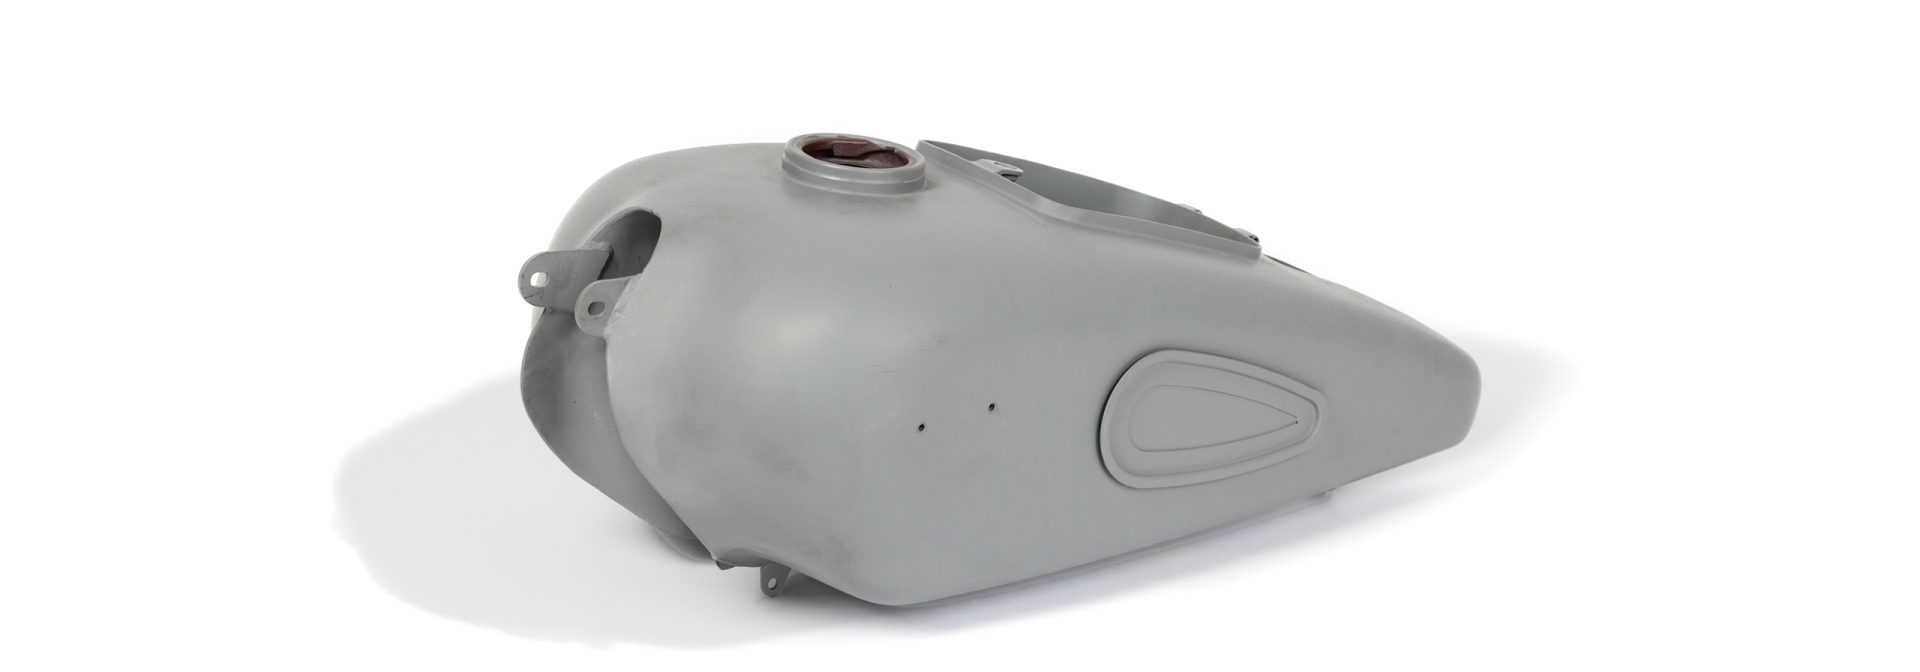 BMW Classic motorcycle reproduction fuel tank (R 51/3 with R67 with R68)